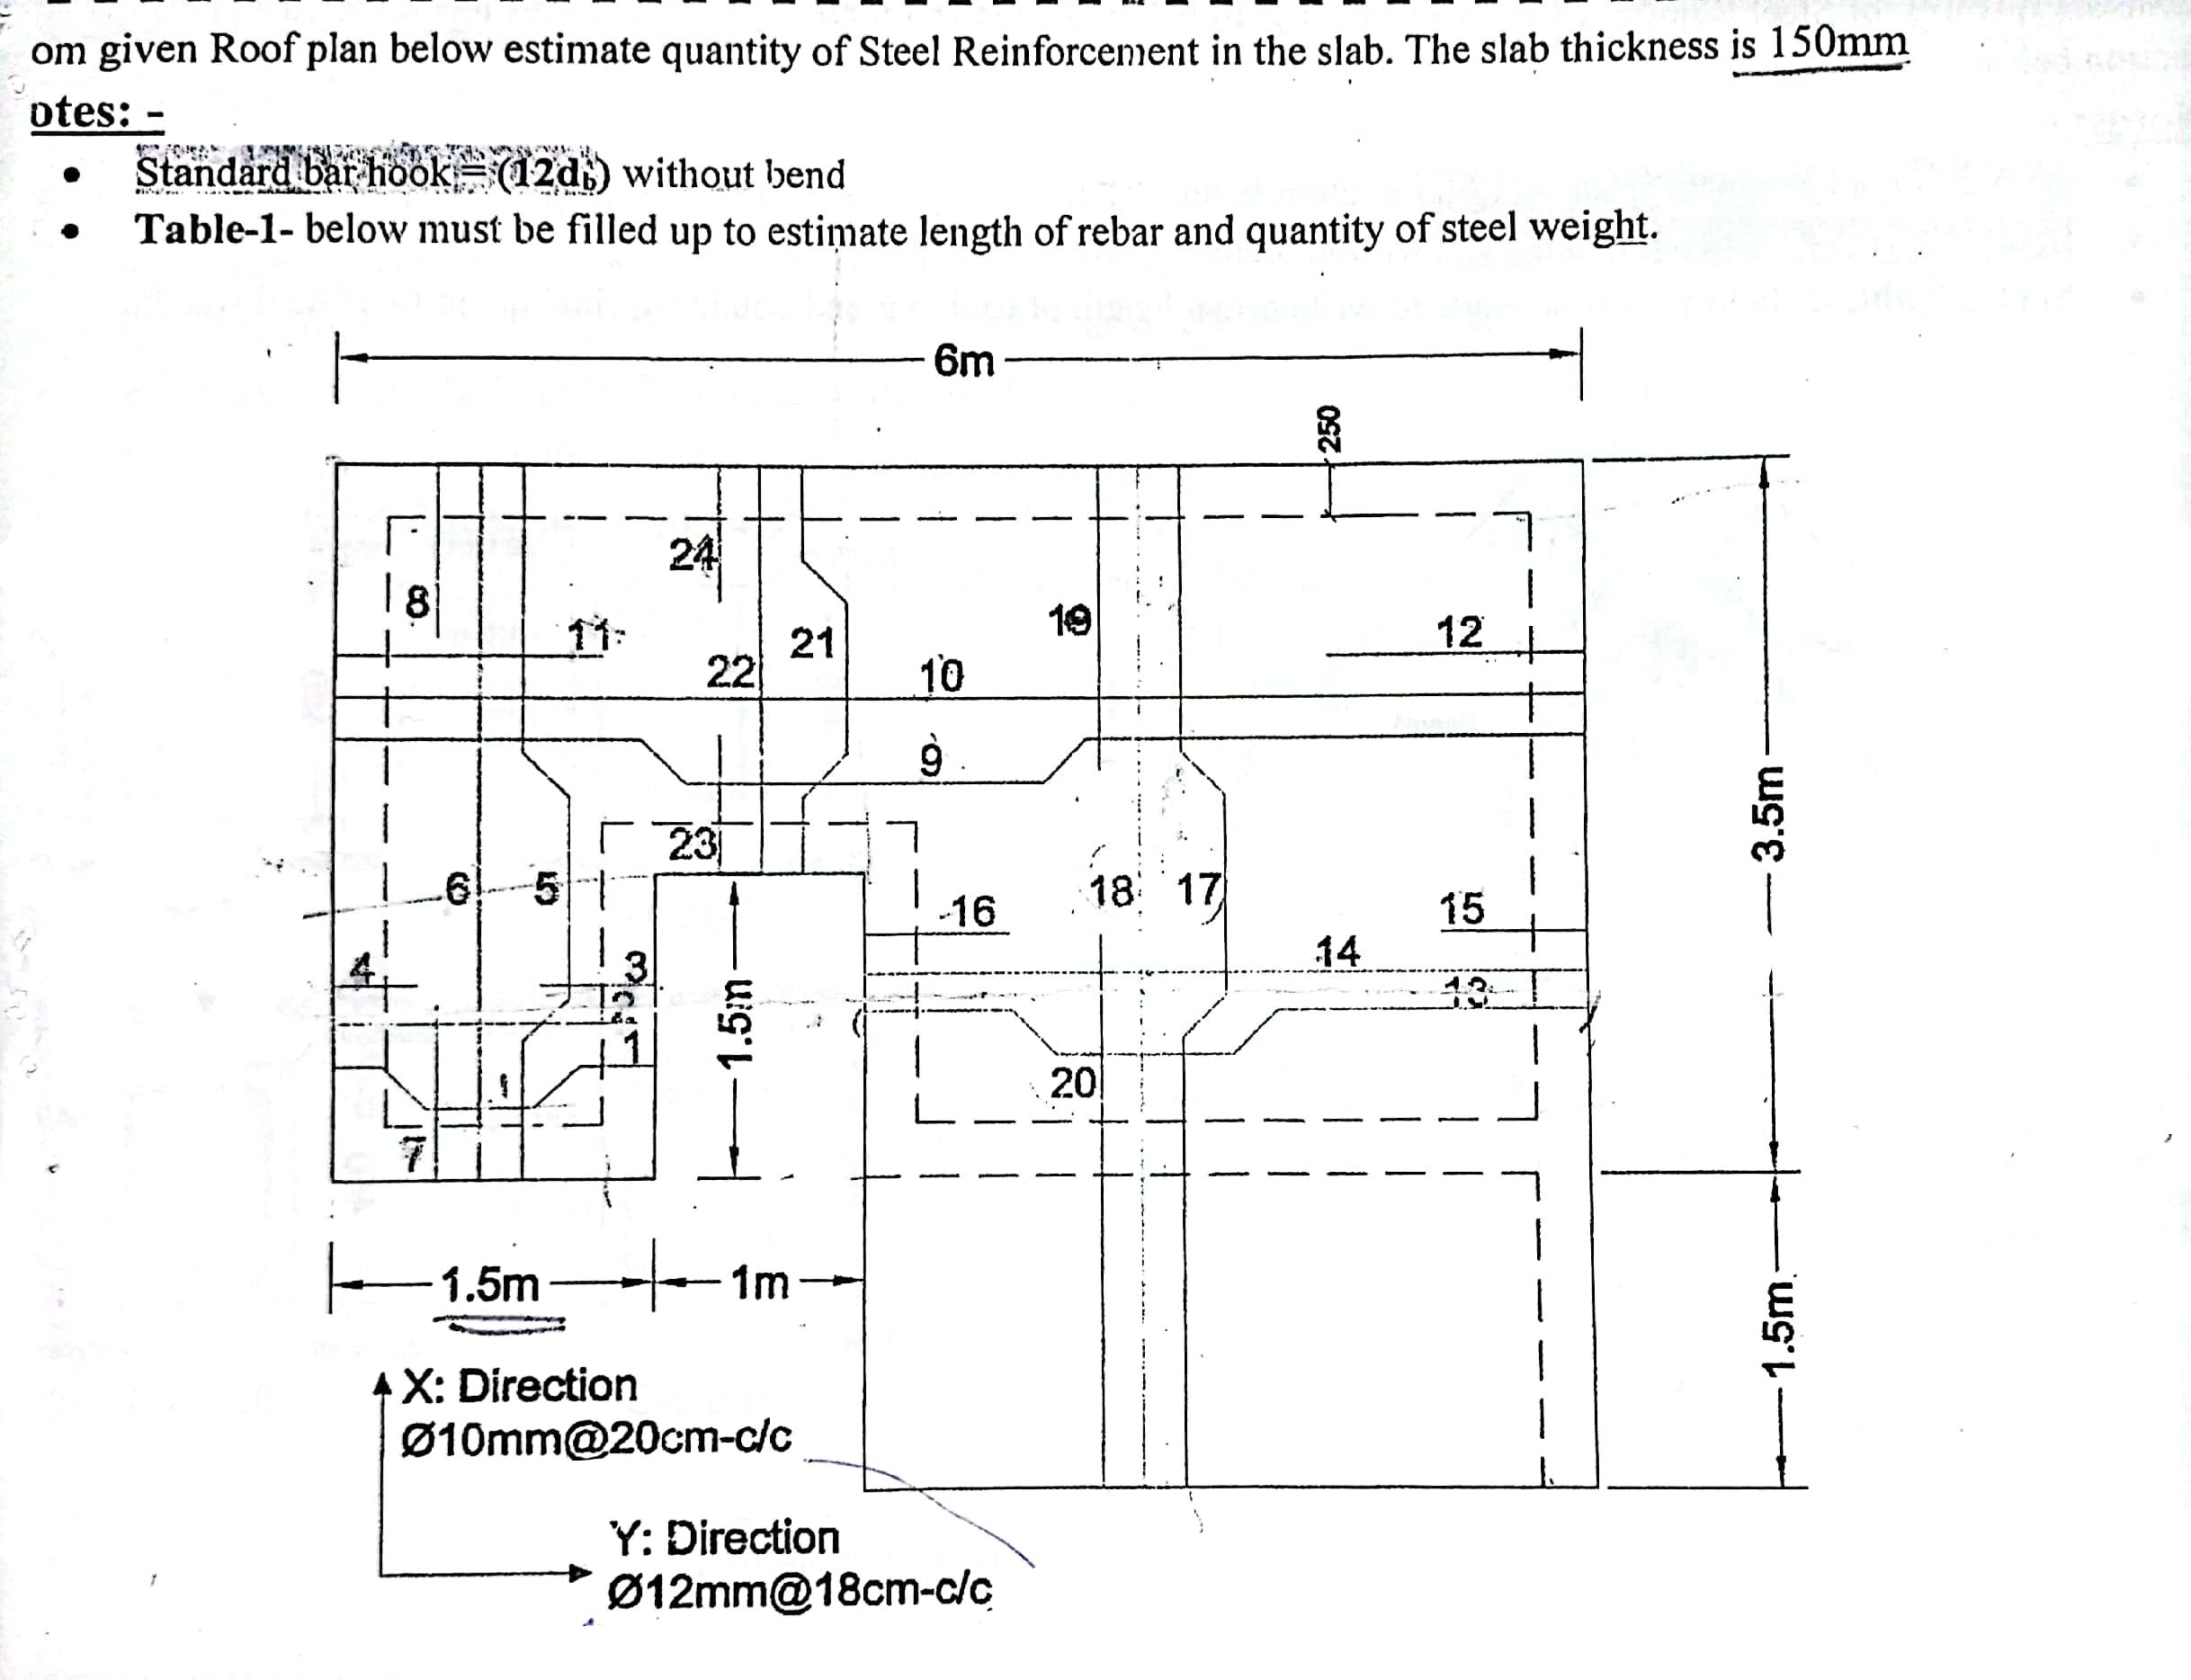 om given Roof plan below estimate quantity of Steel Reinforcement in the slab. The slab thickness is 150mm